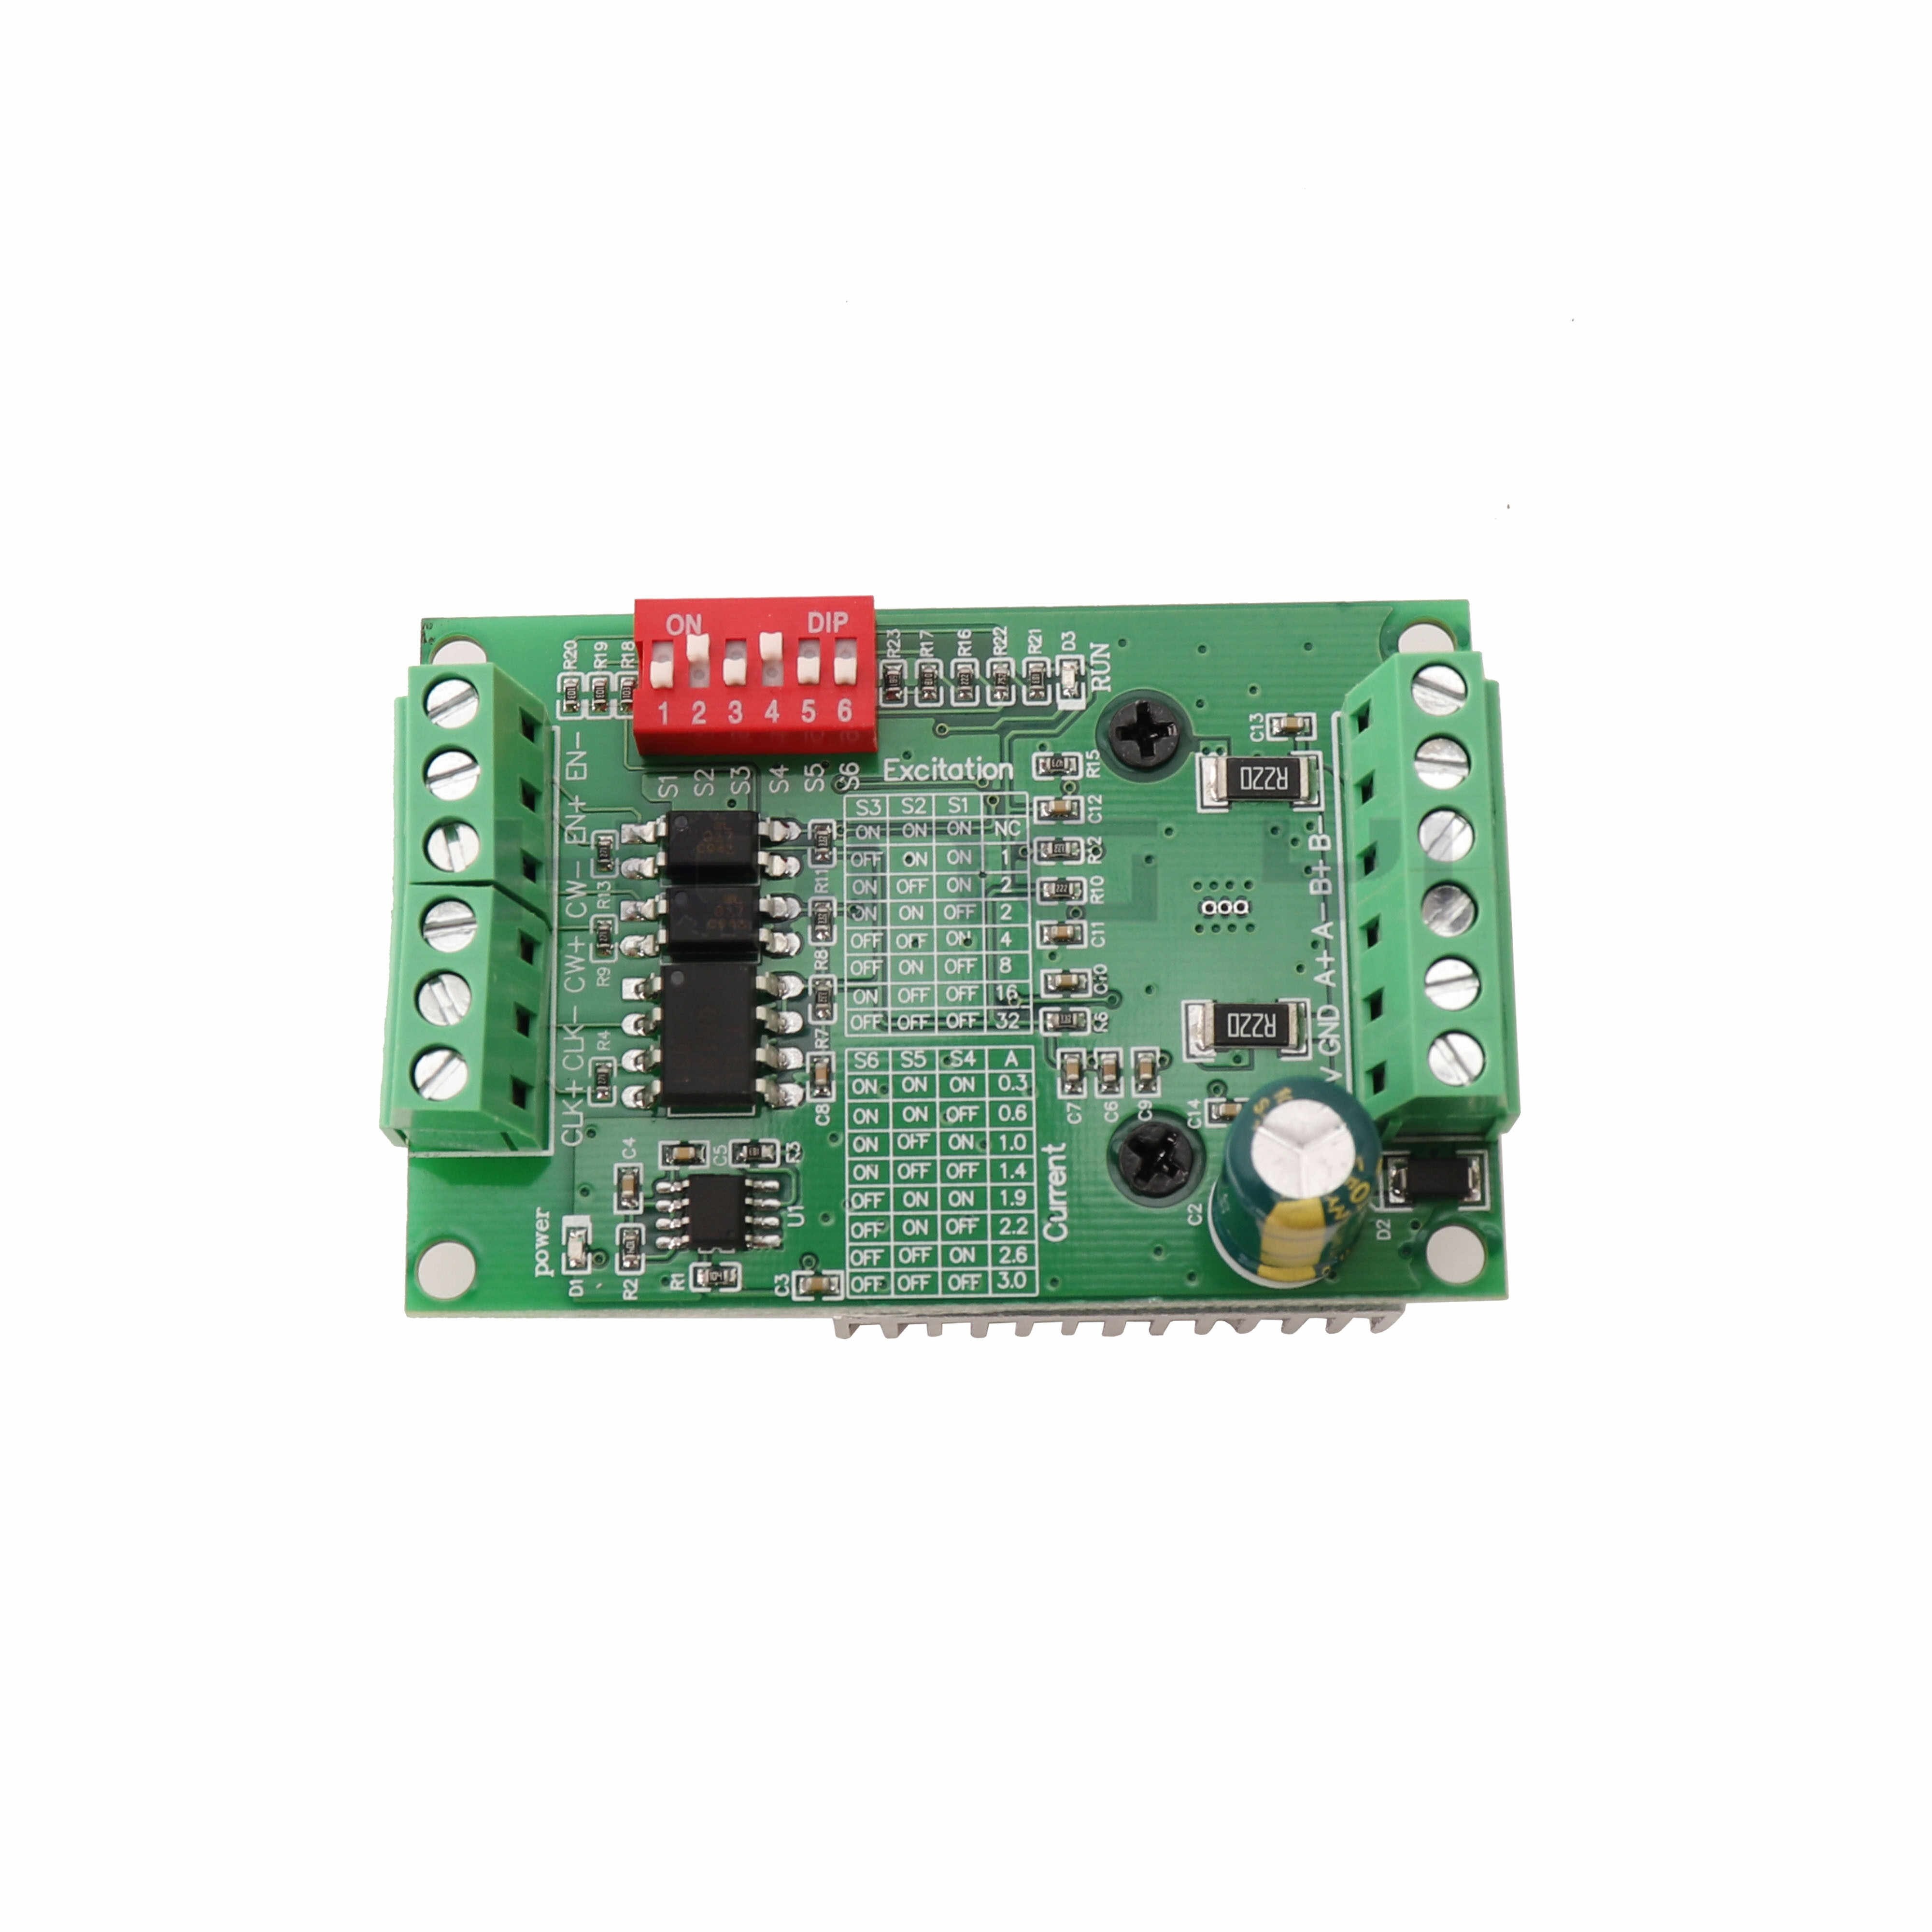 Wireing Diagram 4 Axis Tb6560 Driver Board 5pcs Tb6560 3a Stepper Motor Drives Cnc Stepper Motor Board Single Axis Controller 10 Files Motor Controller Board New Tb6560ahq Of Wireing Diagram 4 Axis Tb6560 Driver Board